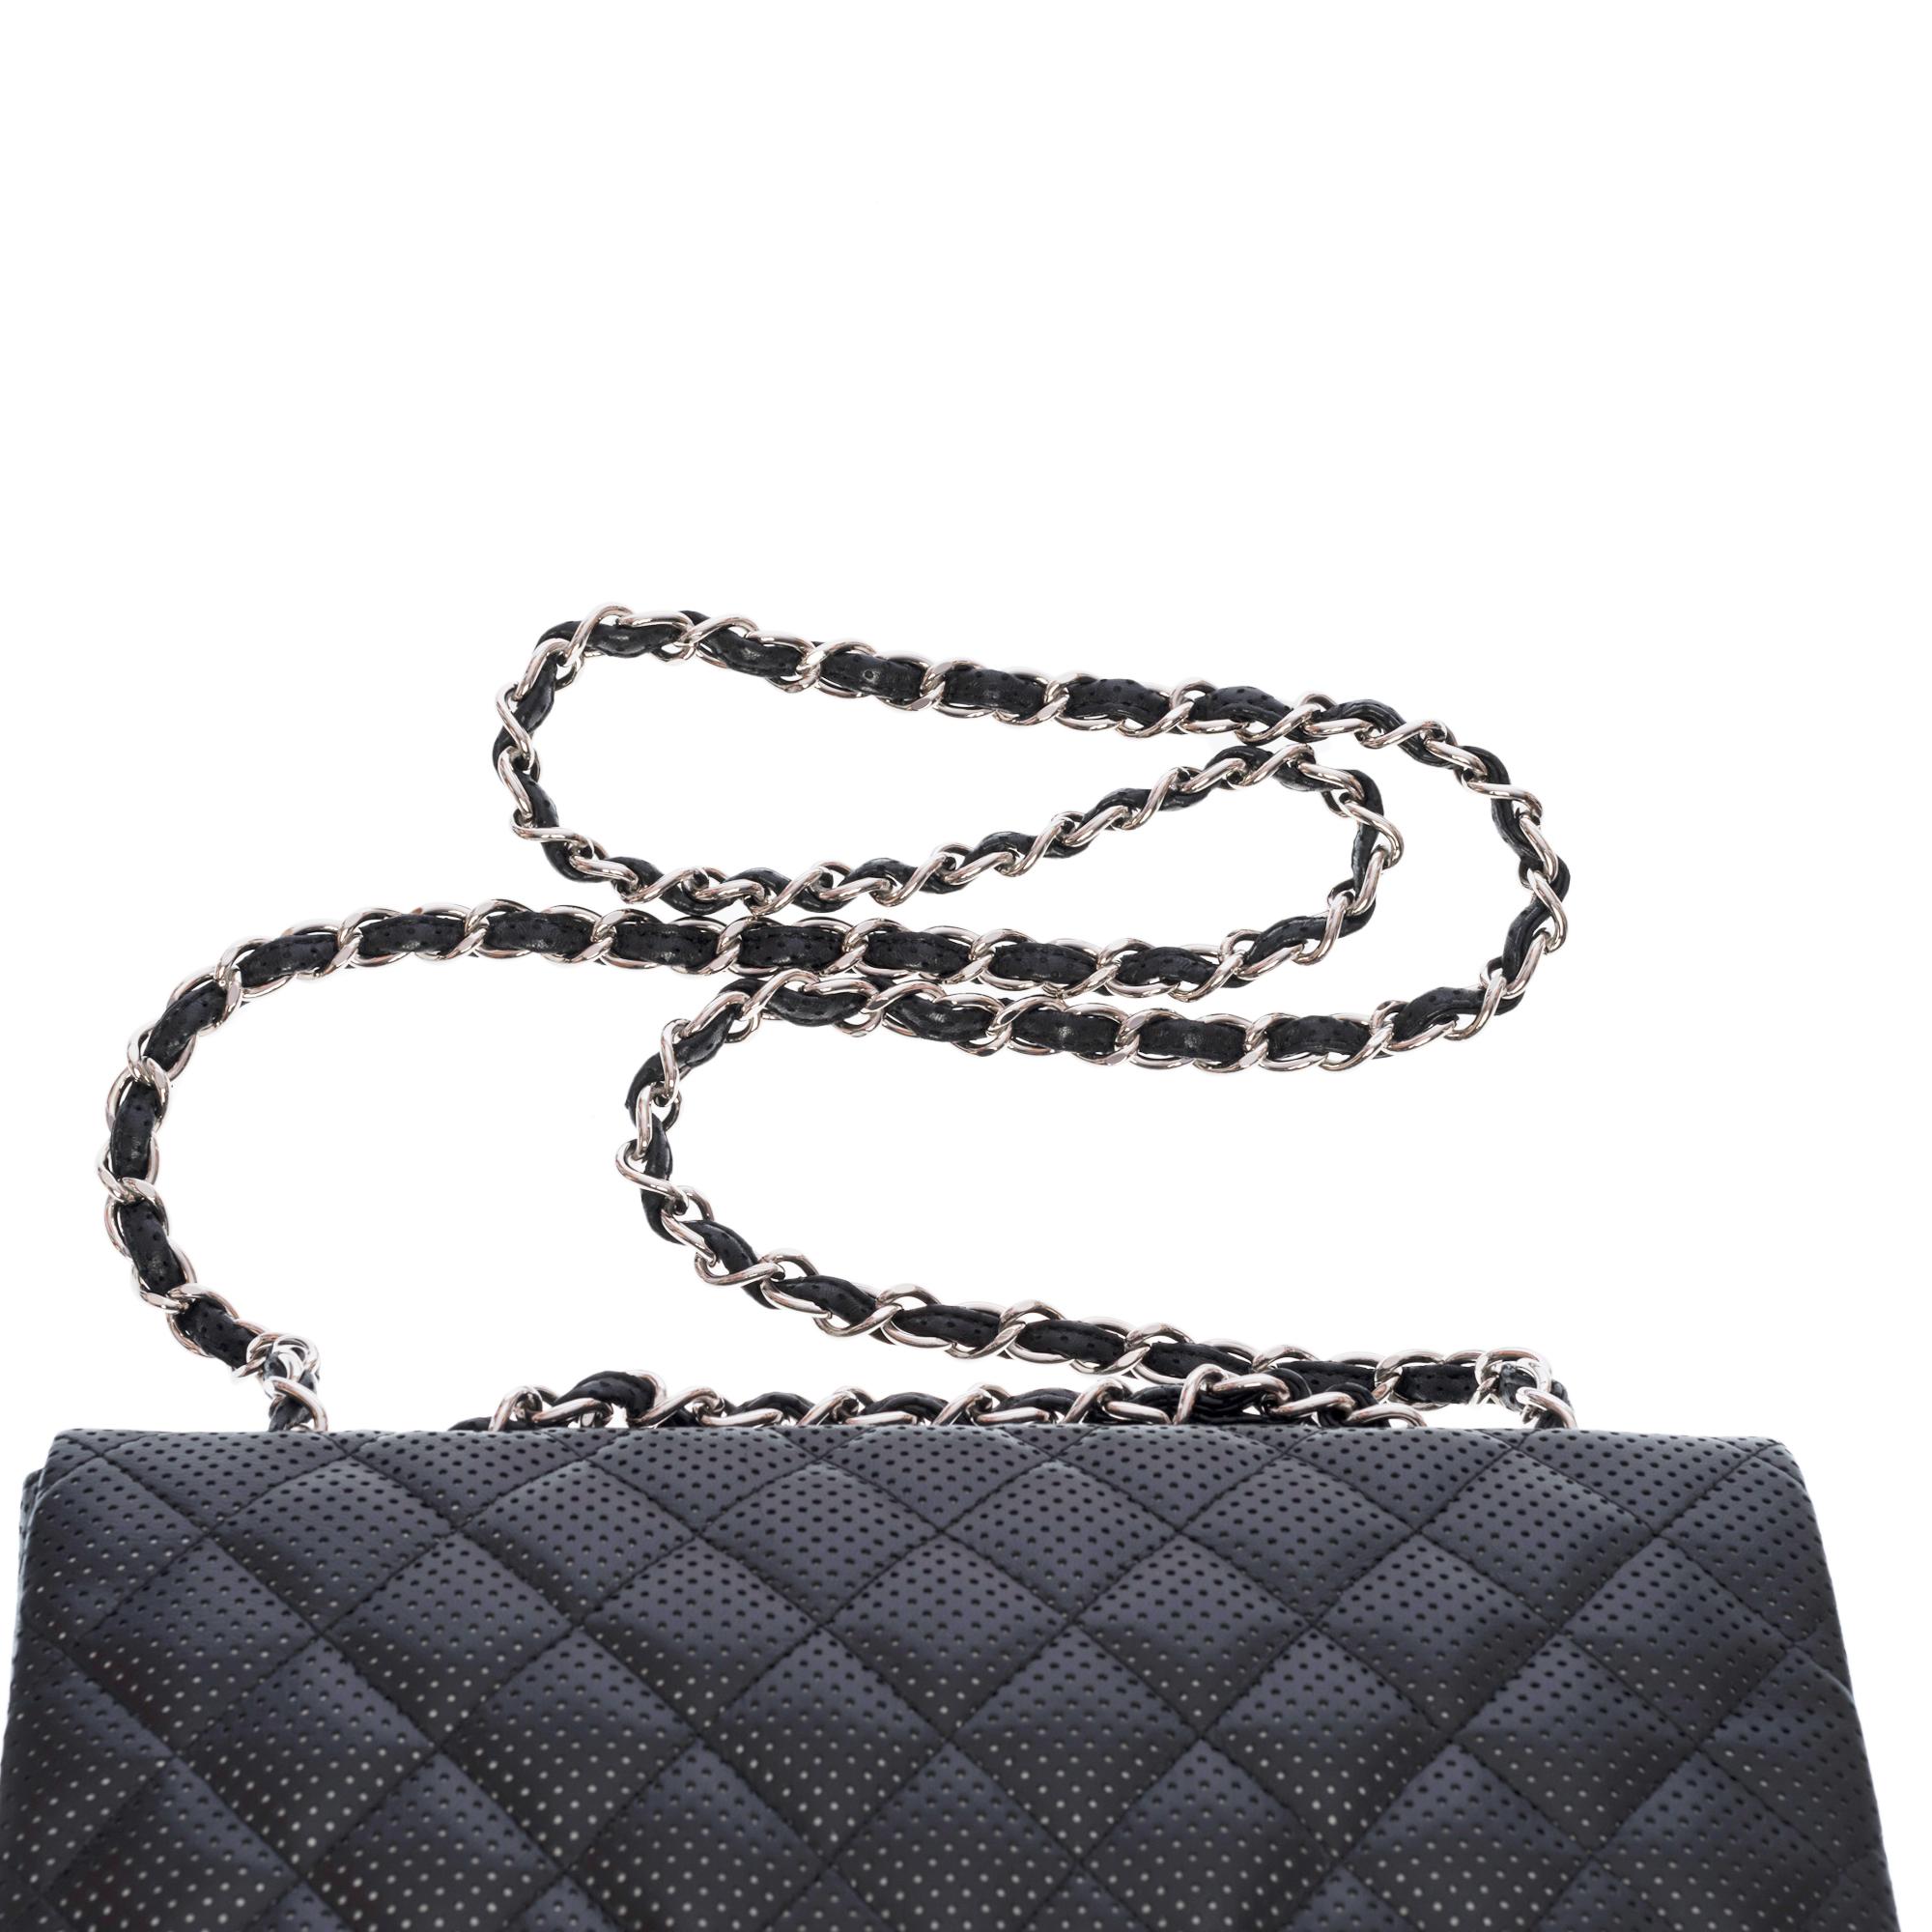 Women's Chanel Timeless Jumbo shoulder Flap bag in black quilted perforated leather, SHW